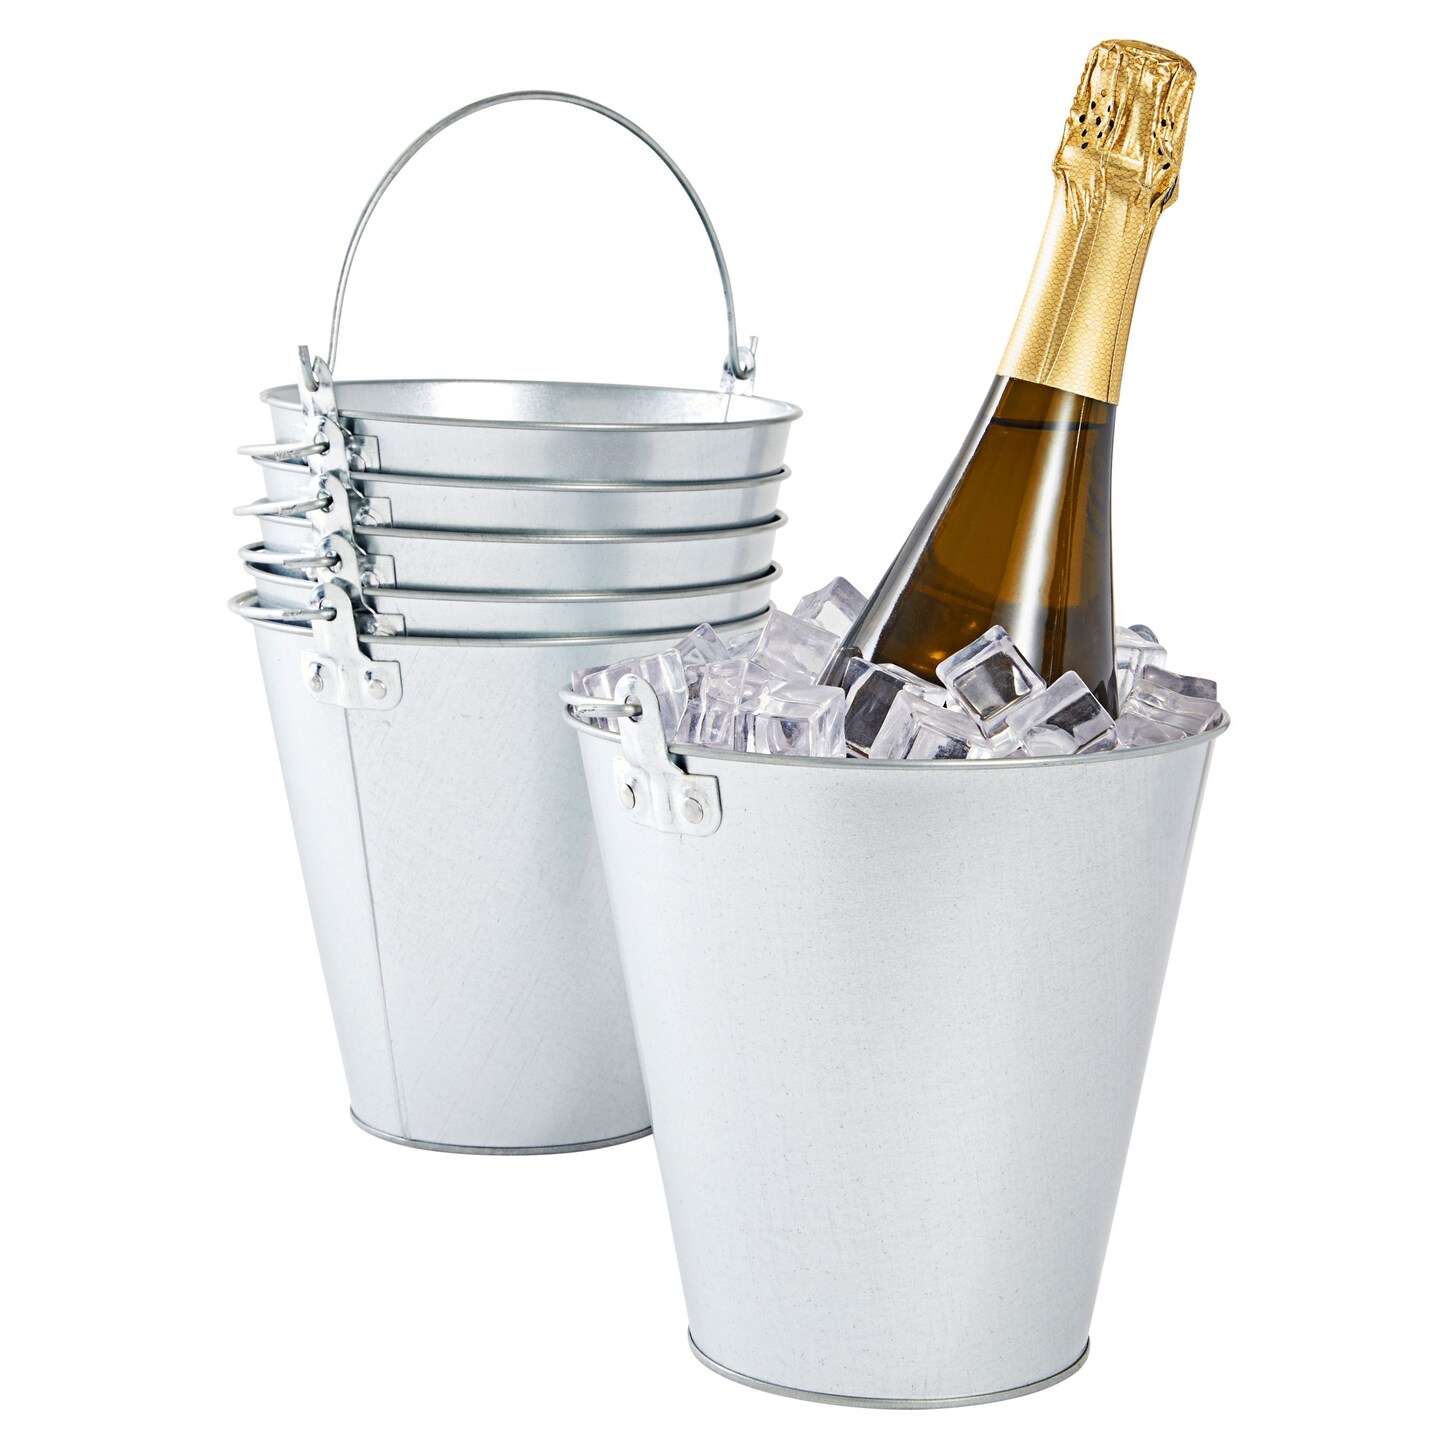 Mini Buckets for Crafts and Party Favors (3.3 x 2.5 x 3 in, 10 Pack)